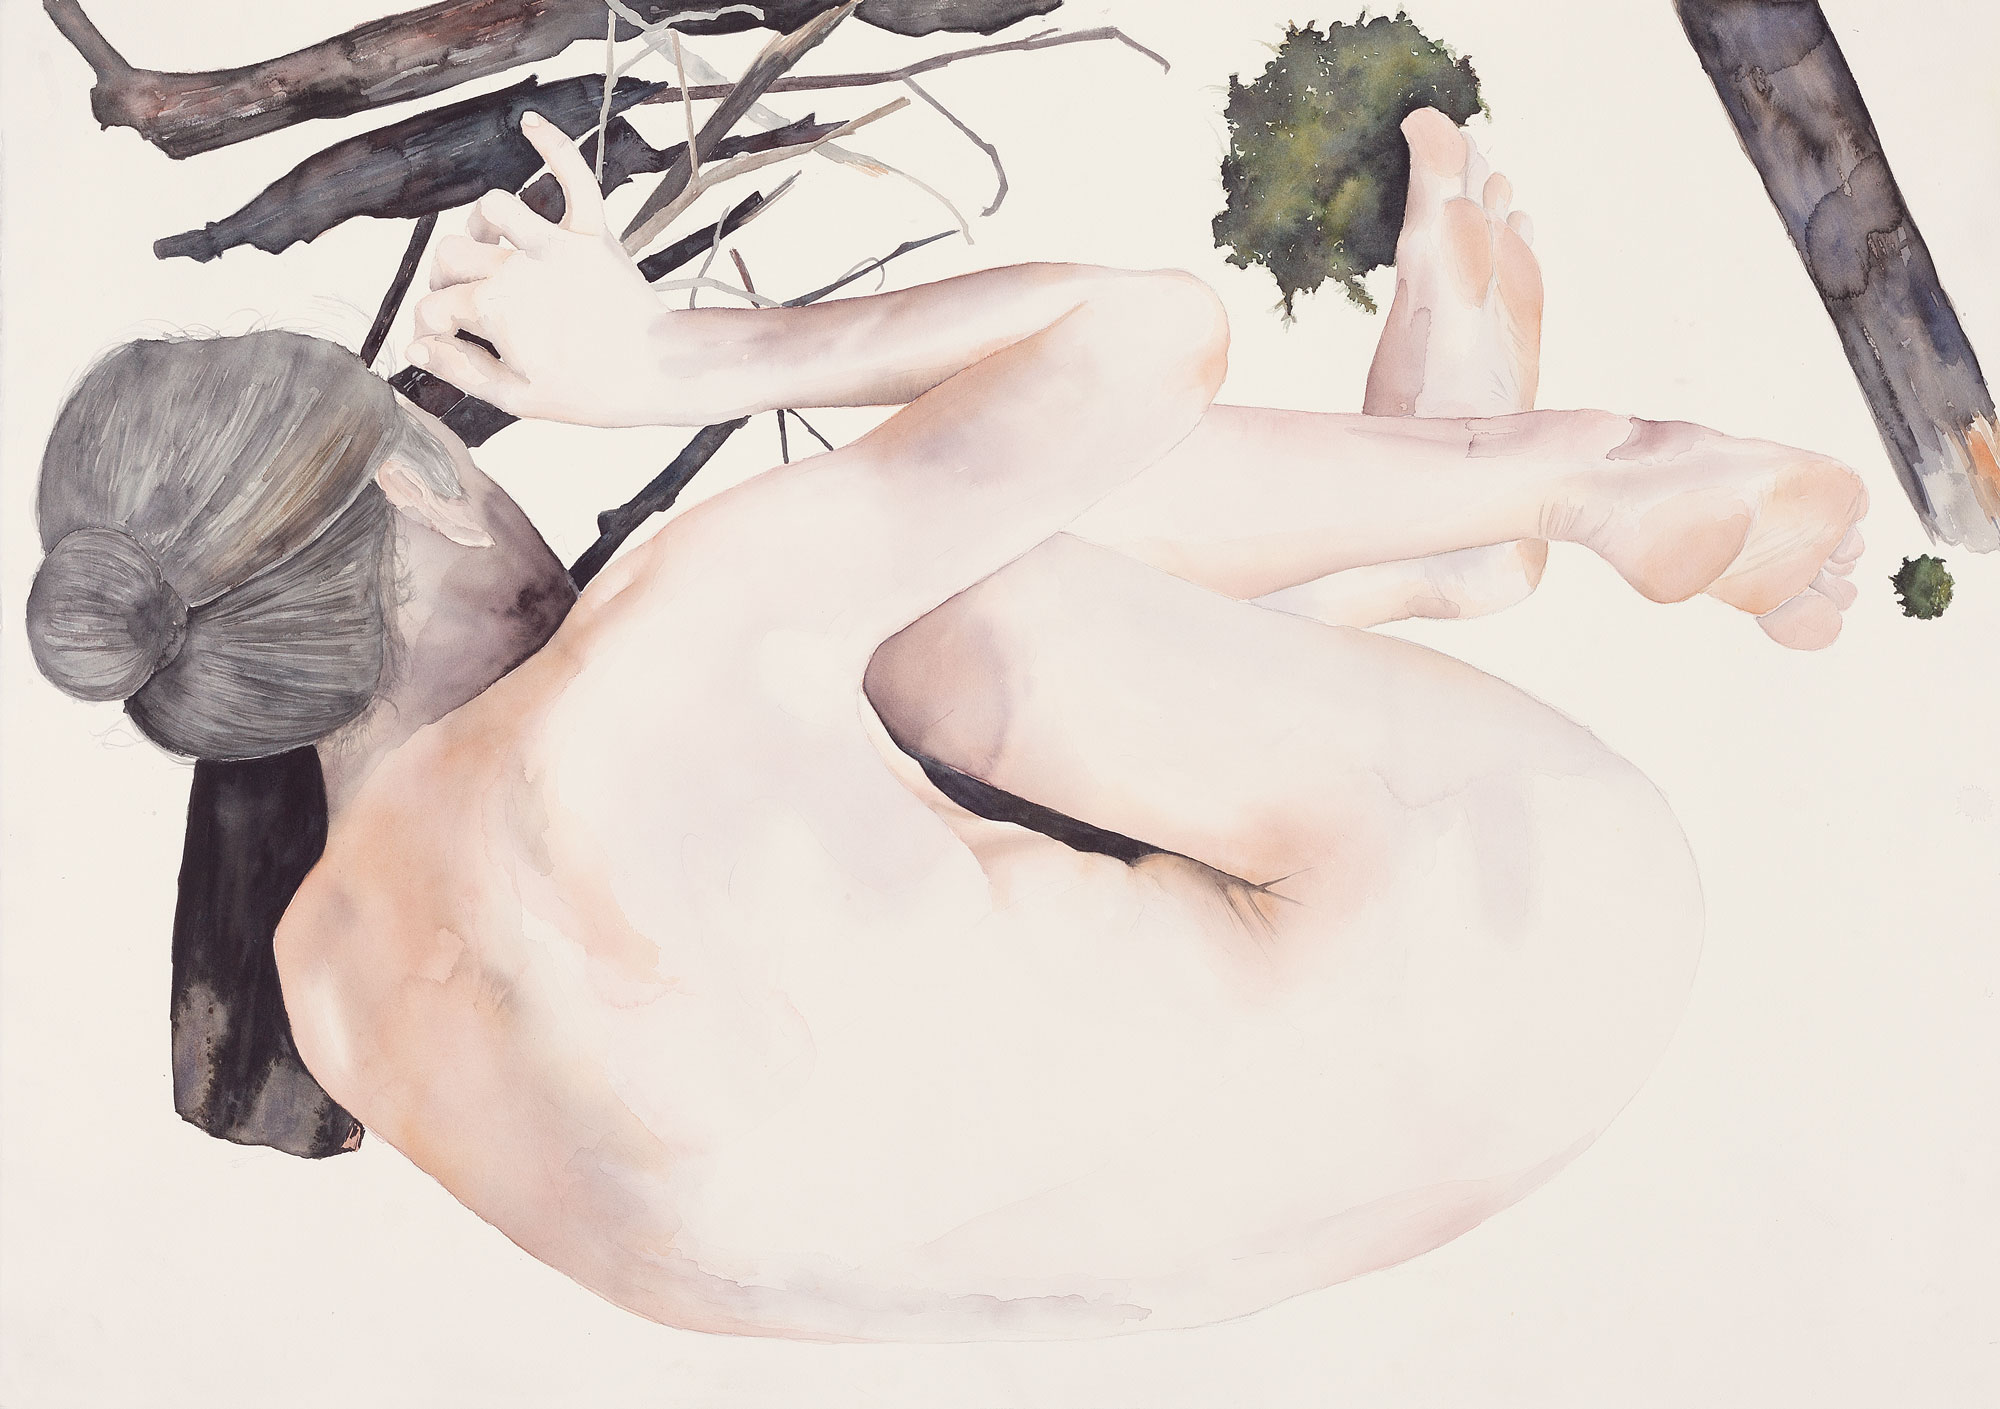 Rituals of transition #2, 2015. Watercolor on paper, 80 x 113 cm